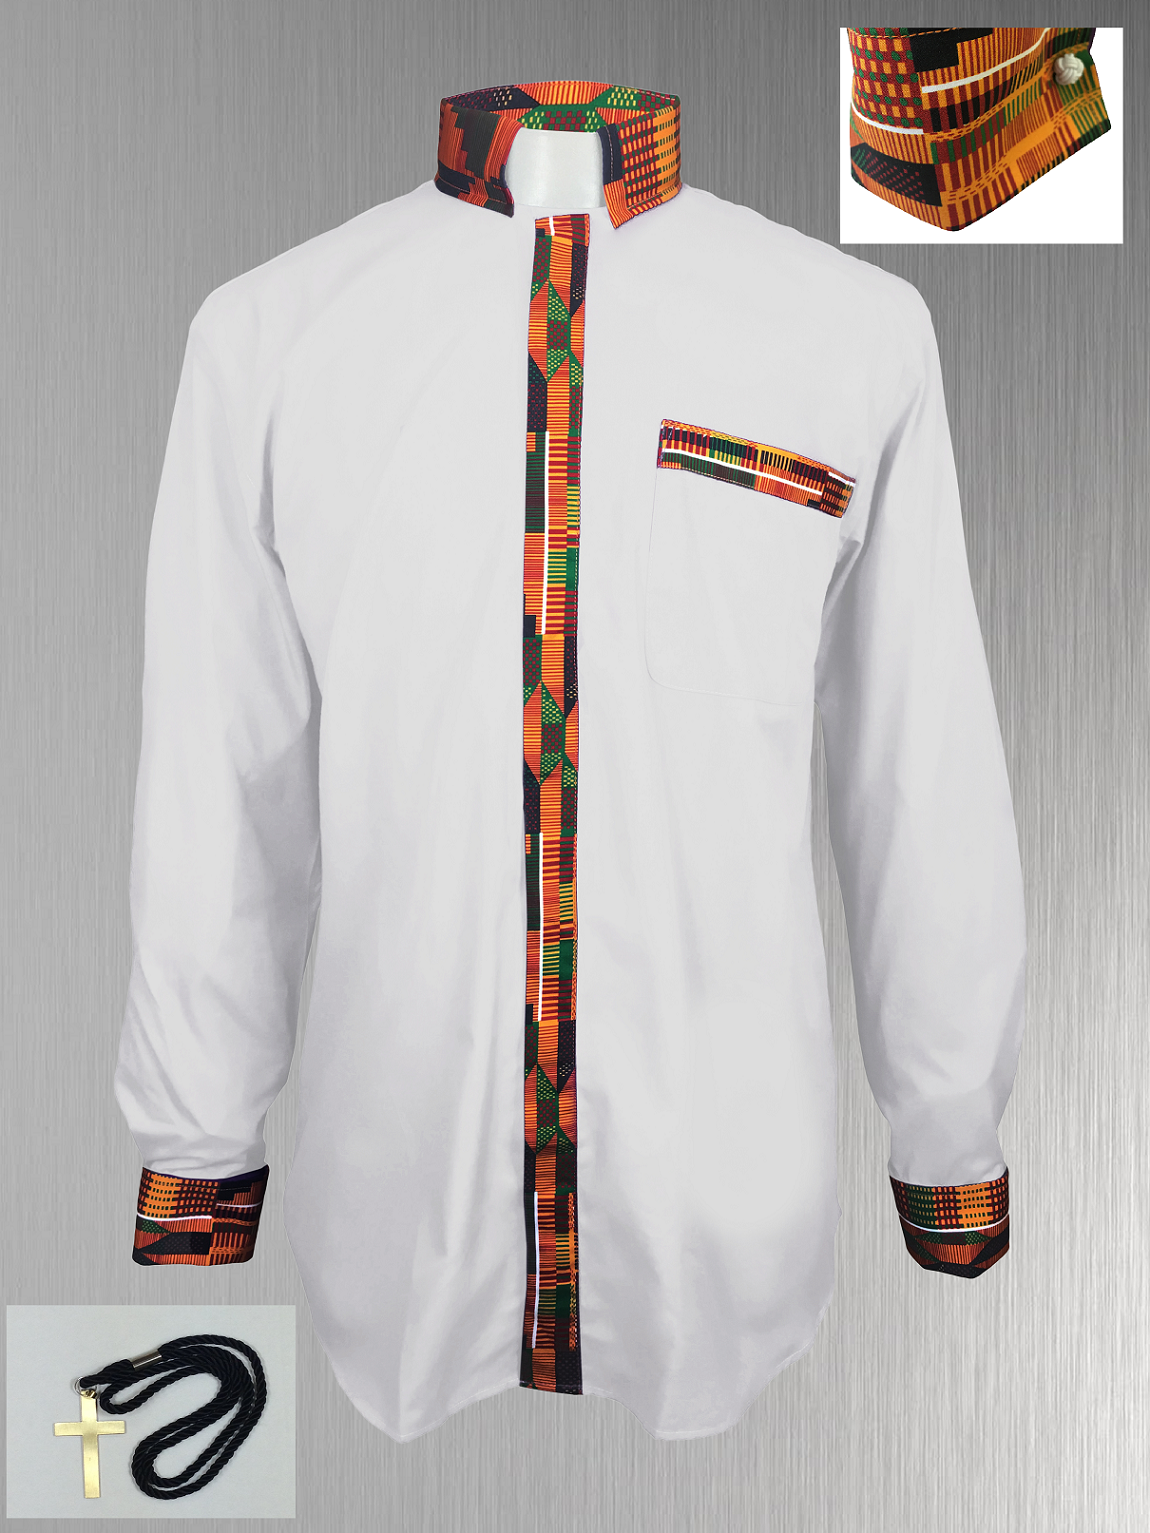 White Clergy Shirt with Kente Cloth Fabric